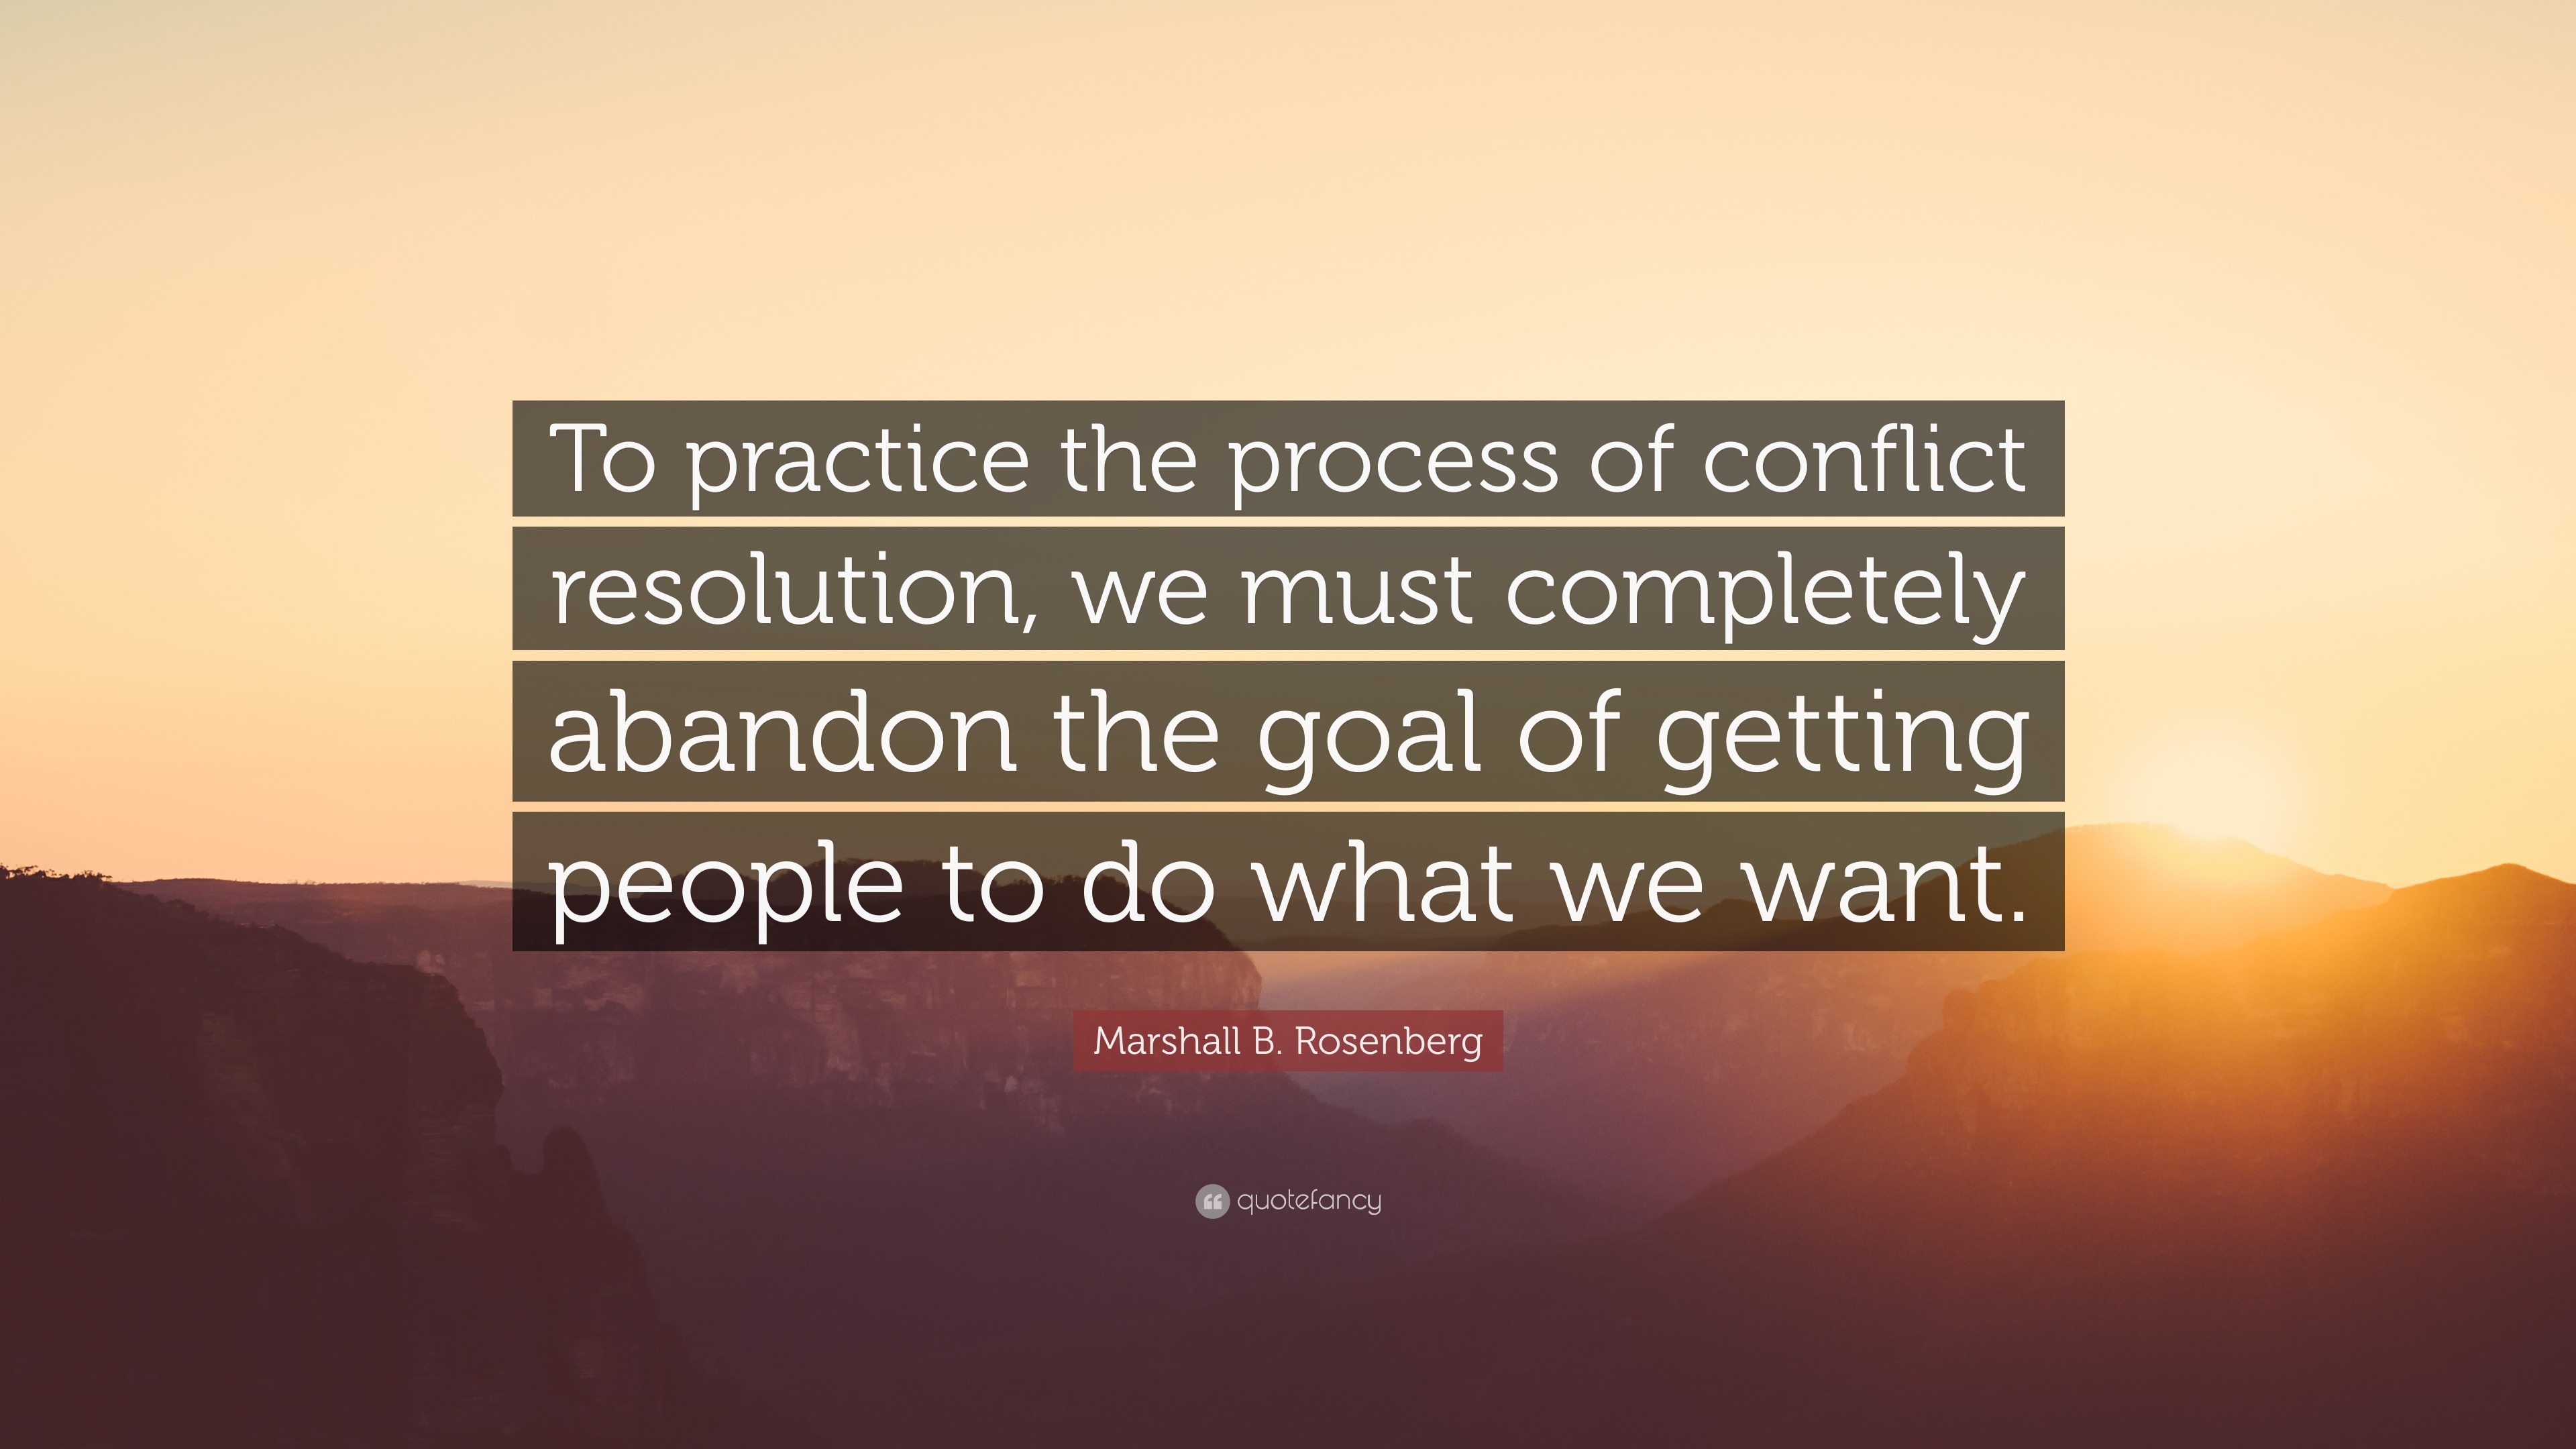 quote on conflict